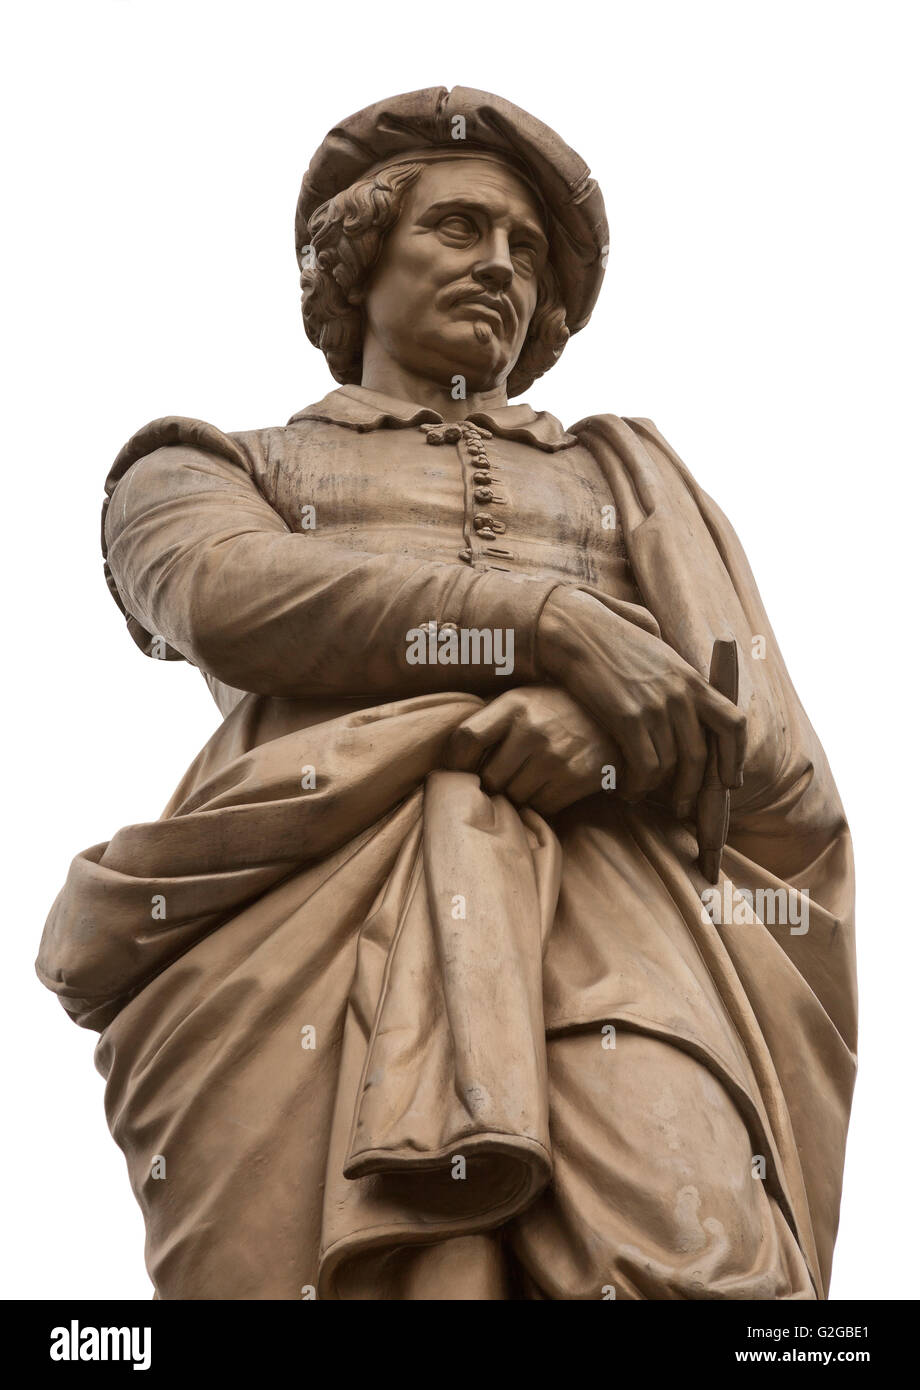 Statue of Rembrandt, among the company of shooters statues, Rembrandt Square, Amsterdam Stock Photo